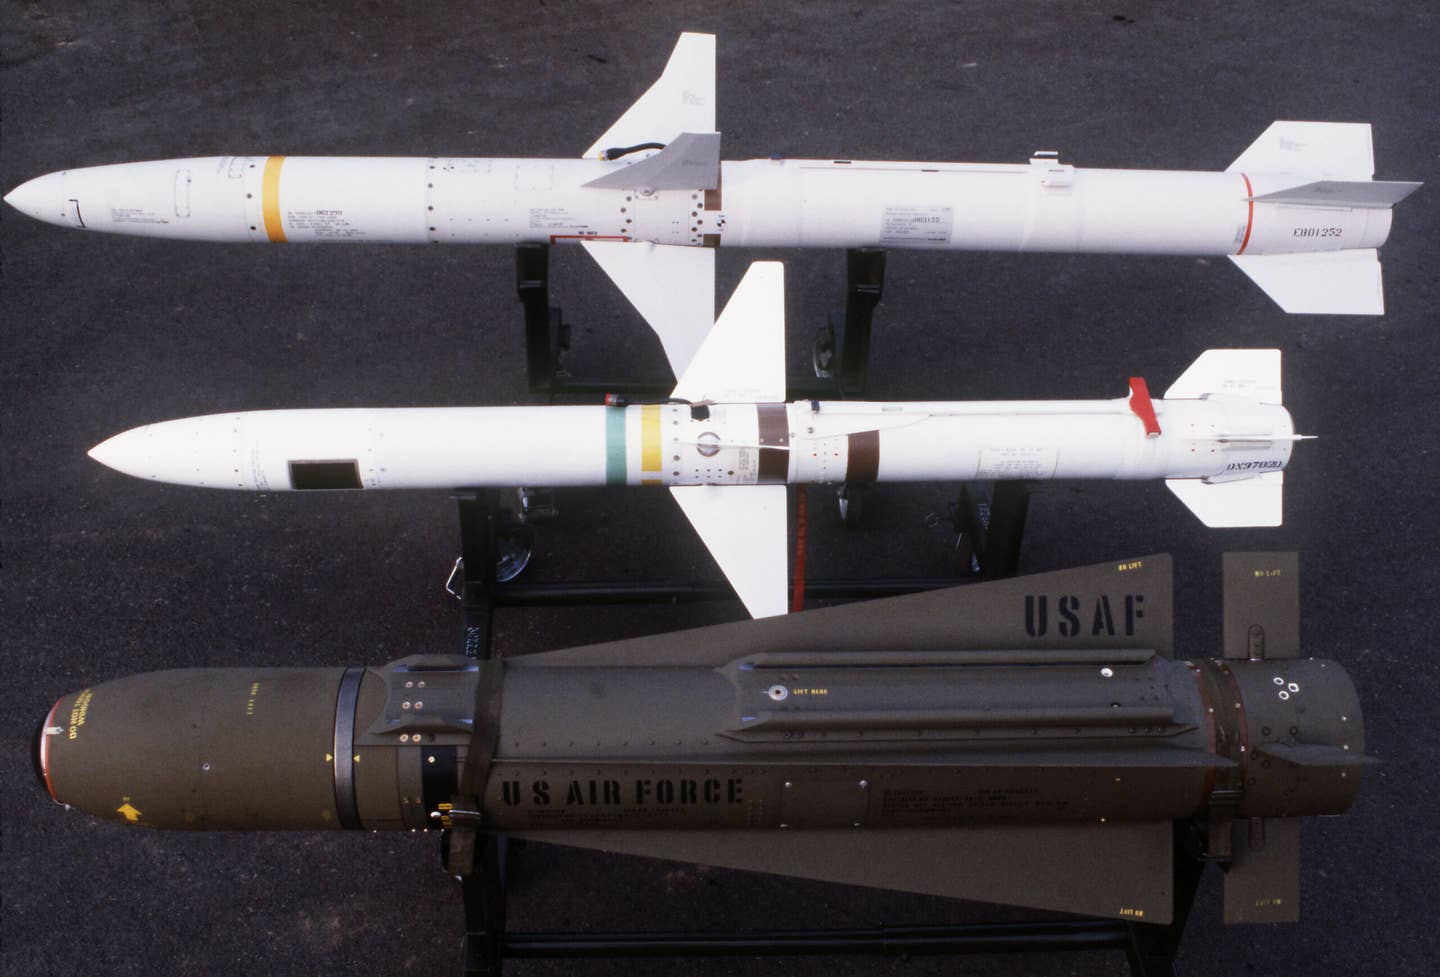 A view of, from top to bottom, an AGM-88 HARM high-speed anti-radiation missile, an AGM-45 Shrike anti-radiation missile, and an AGM-65 Maverick television-guided missile. (USAF image)